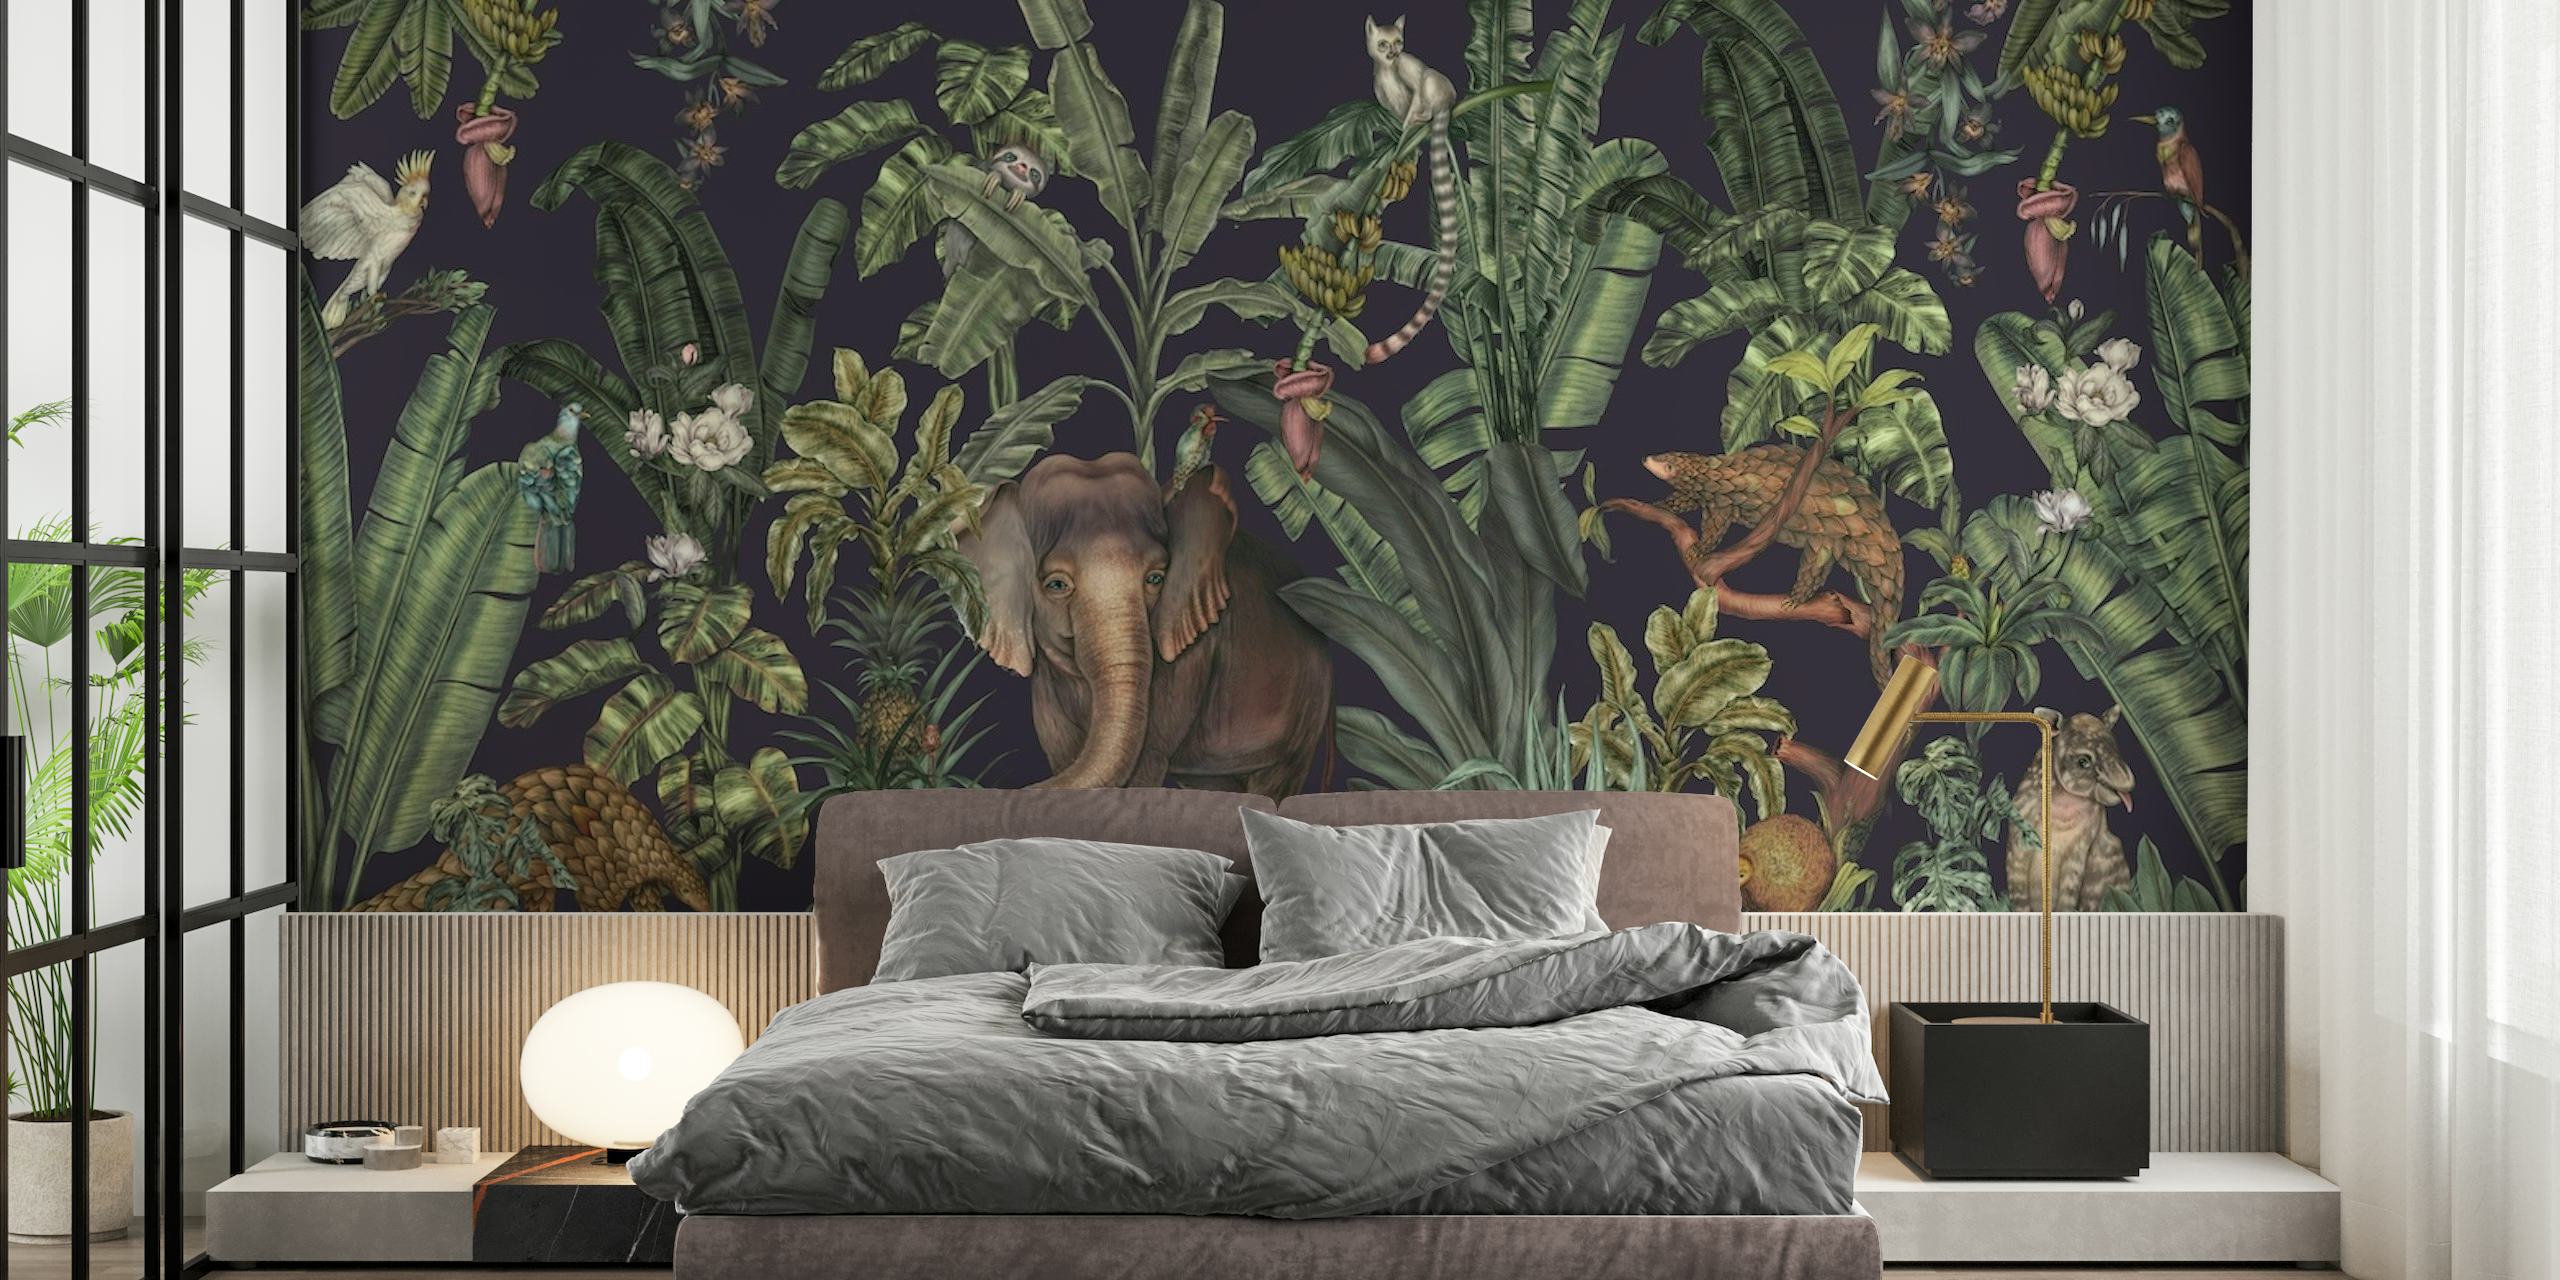 Tropical jungle wall mural with dense greenery and hidden wildlife